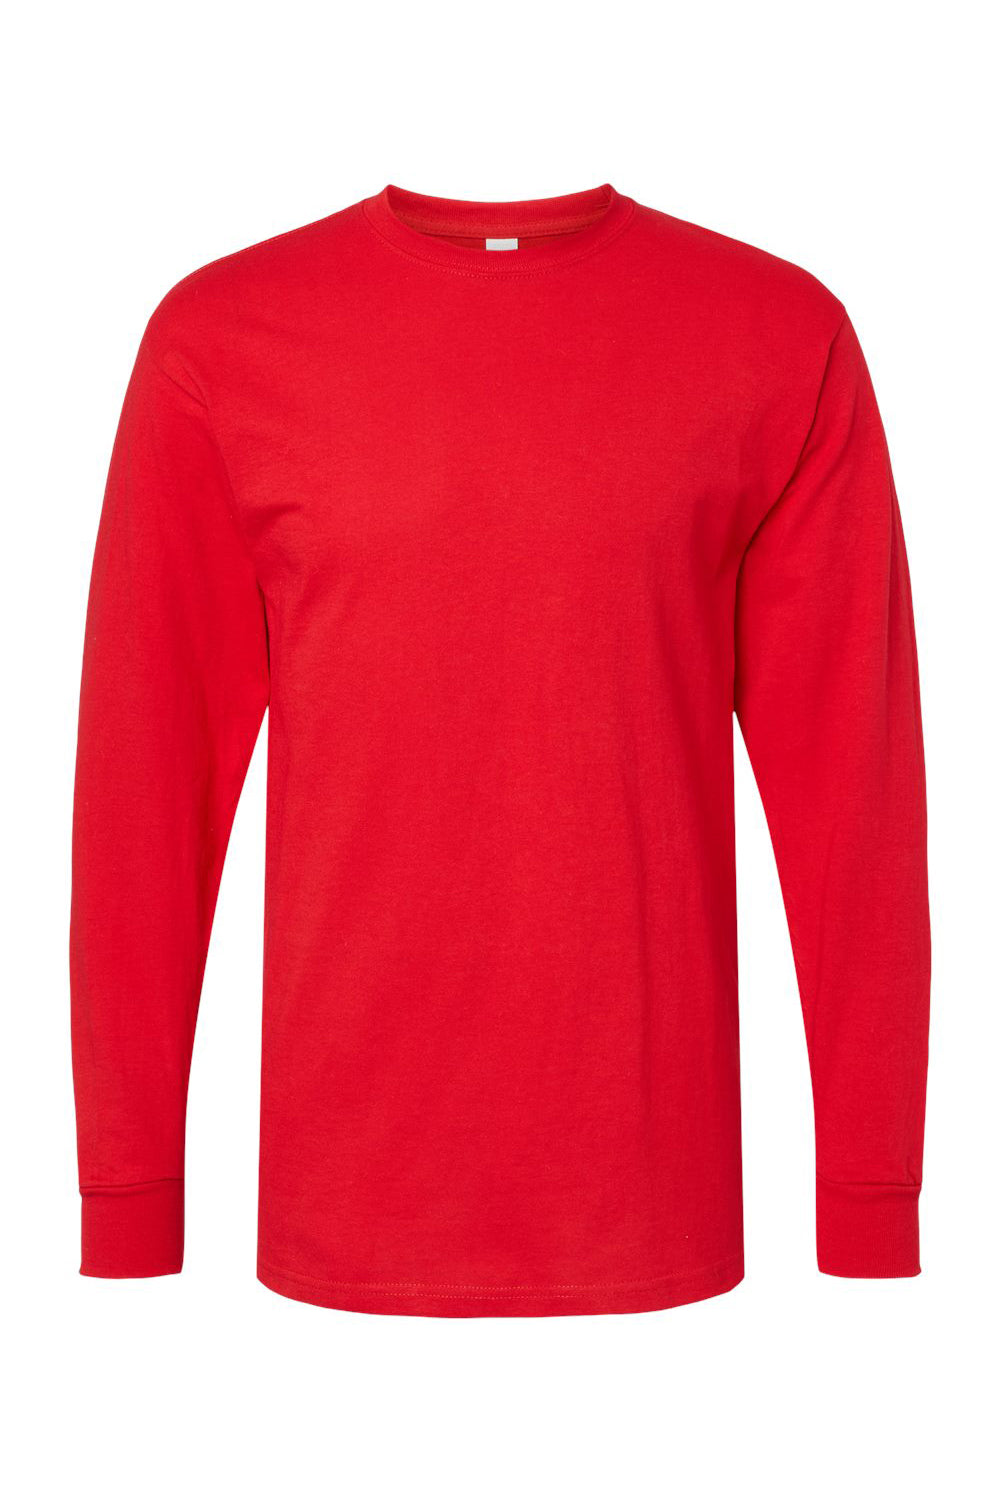 M&O 4820 Mens Gold Soft Touch Long Sleeve Crewneck T-Shirt Deep Red Flat Front